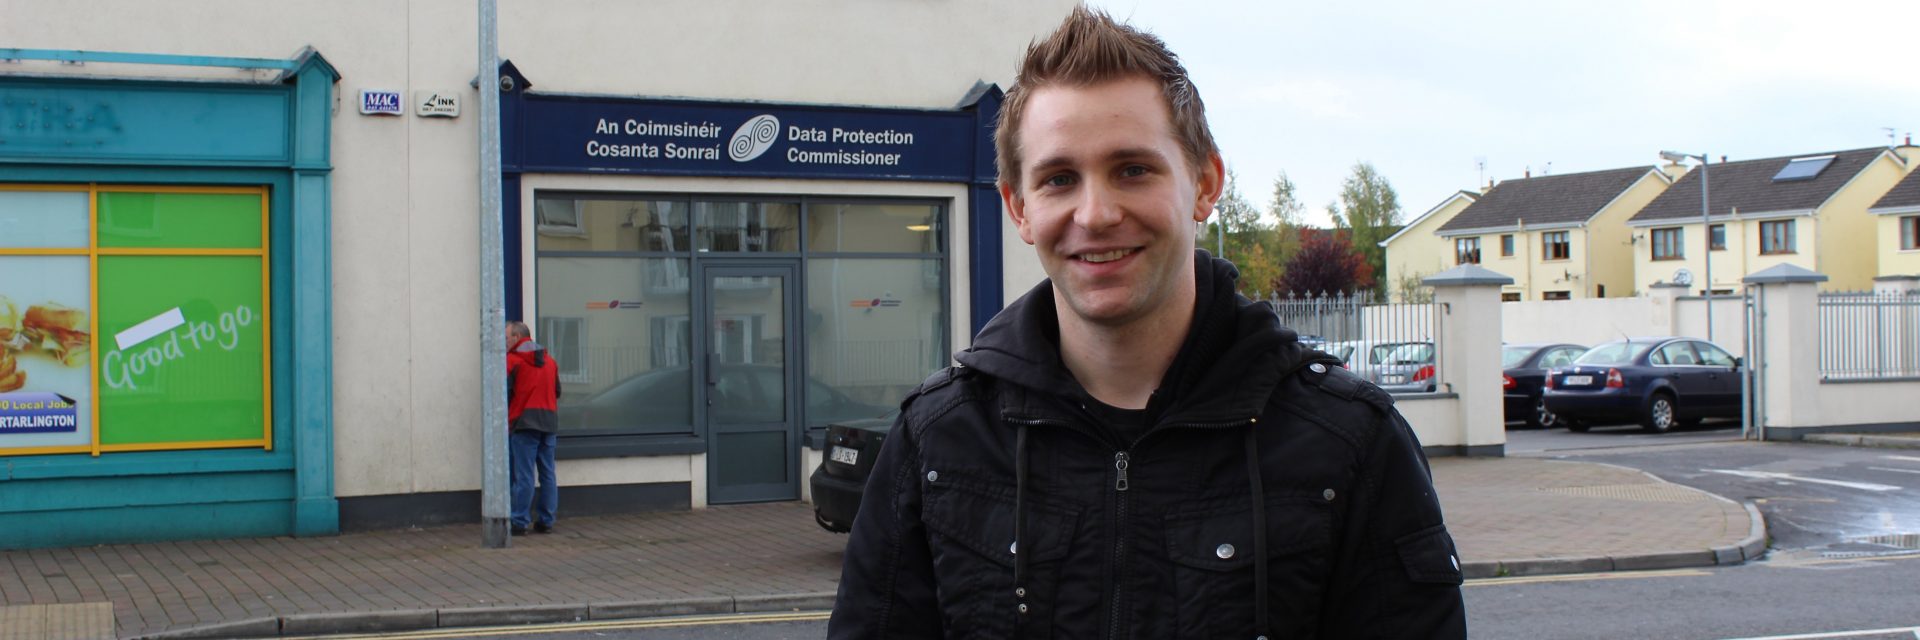 11 vague questions, Facebook, Max Schrems and the European Court docket of Justice